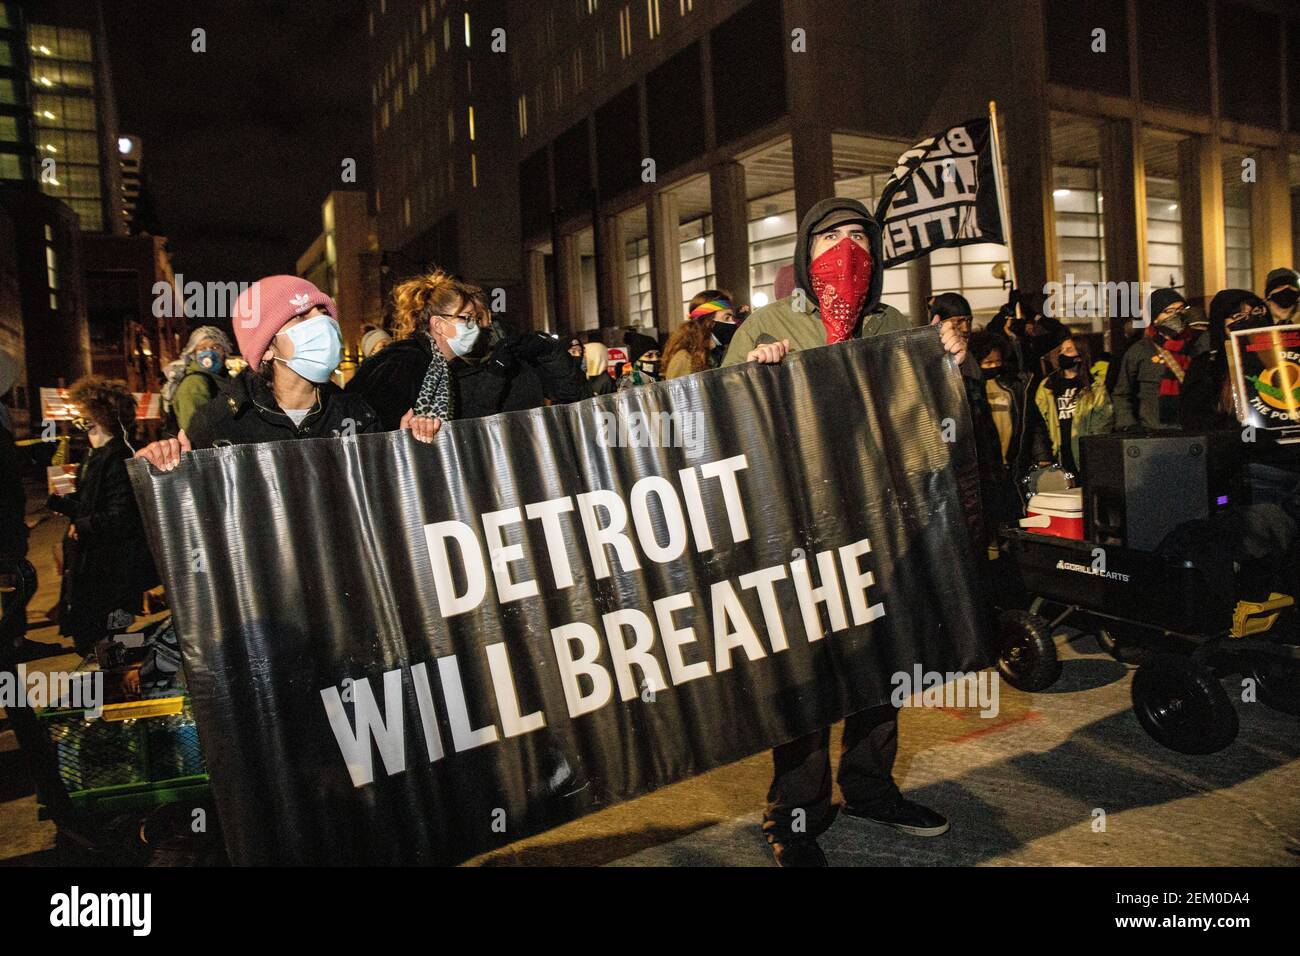 Protesters hold 'Detroit Will Breathe' banner during the march. Detroit Will Breathe, an activist group against police brutality and for Black Lives, organized a 'Chief Craig Resign' night march in downtown Detroit. This particular protest focused on Police Chief James Craig's treatment of right wing protesters who entered Detroit to stop the counting of votes in the TCF Center on the day after the election. Detroit Will Breathe claims their peaceful protesters have been sent to the hospital by the Detroit Police, while the right wing protesters were welcomed into Detroit. Kevin Saunderson, o Stock Photo